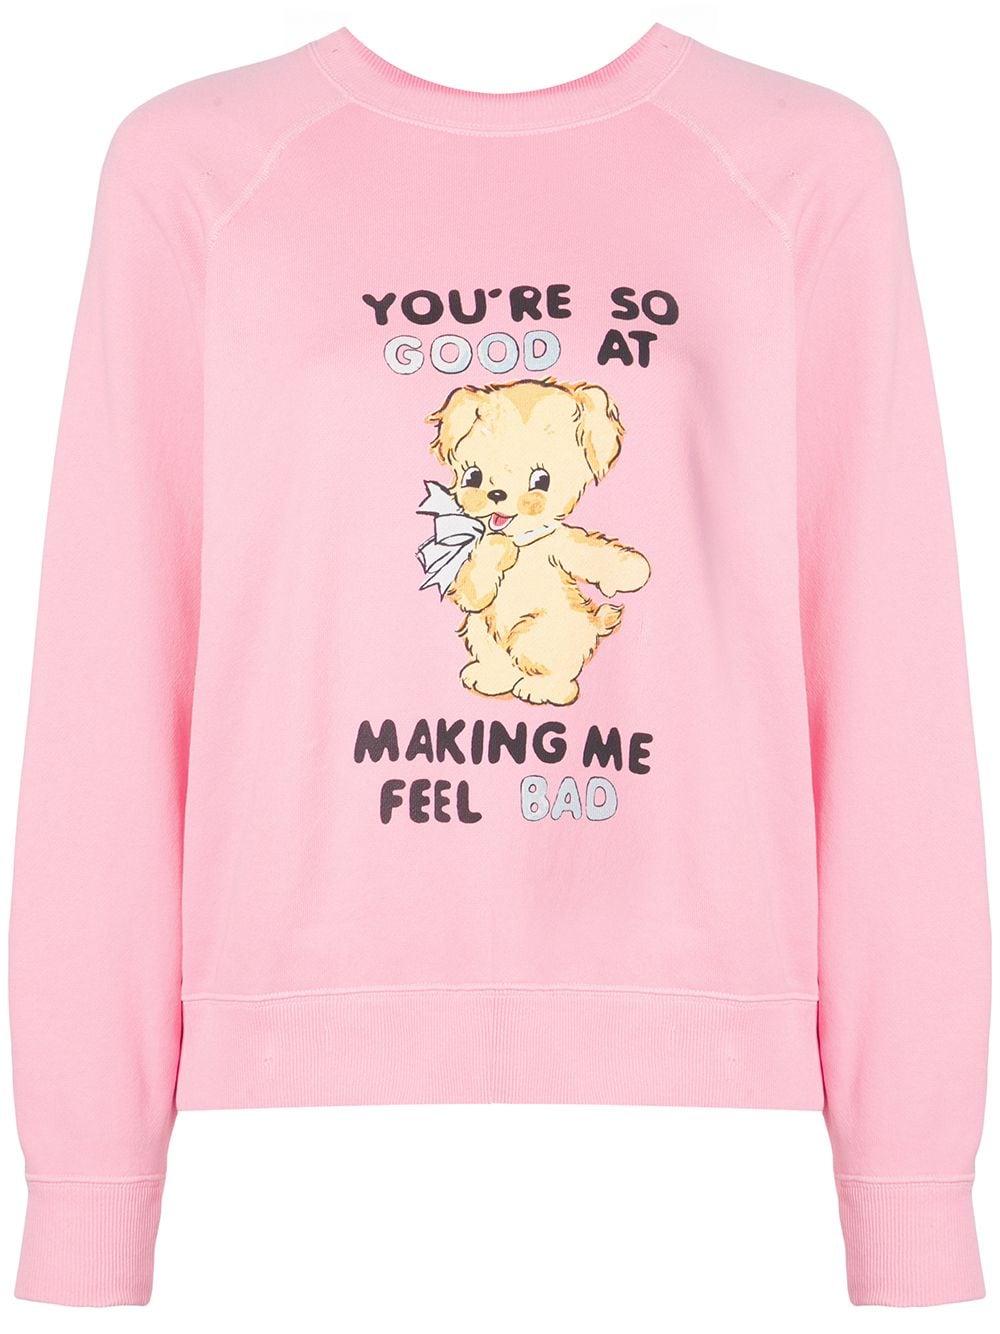 Marc Jacobs on X: 💓 You're so good at making me feel bad 💓 Shop